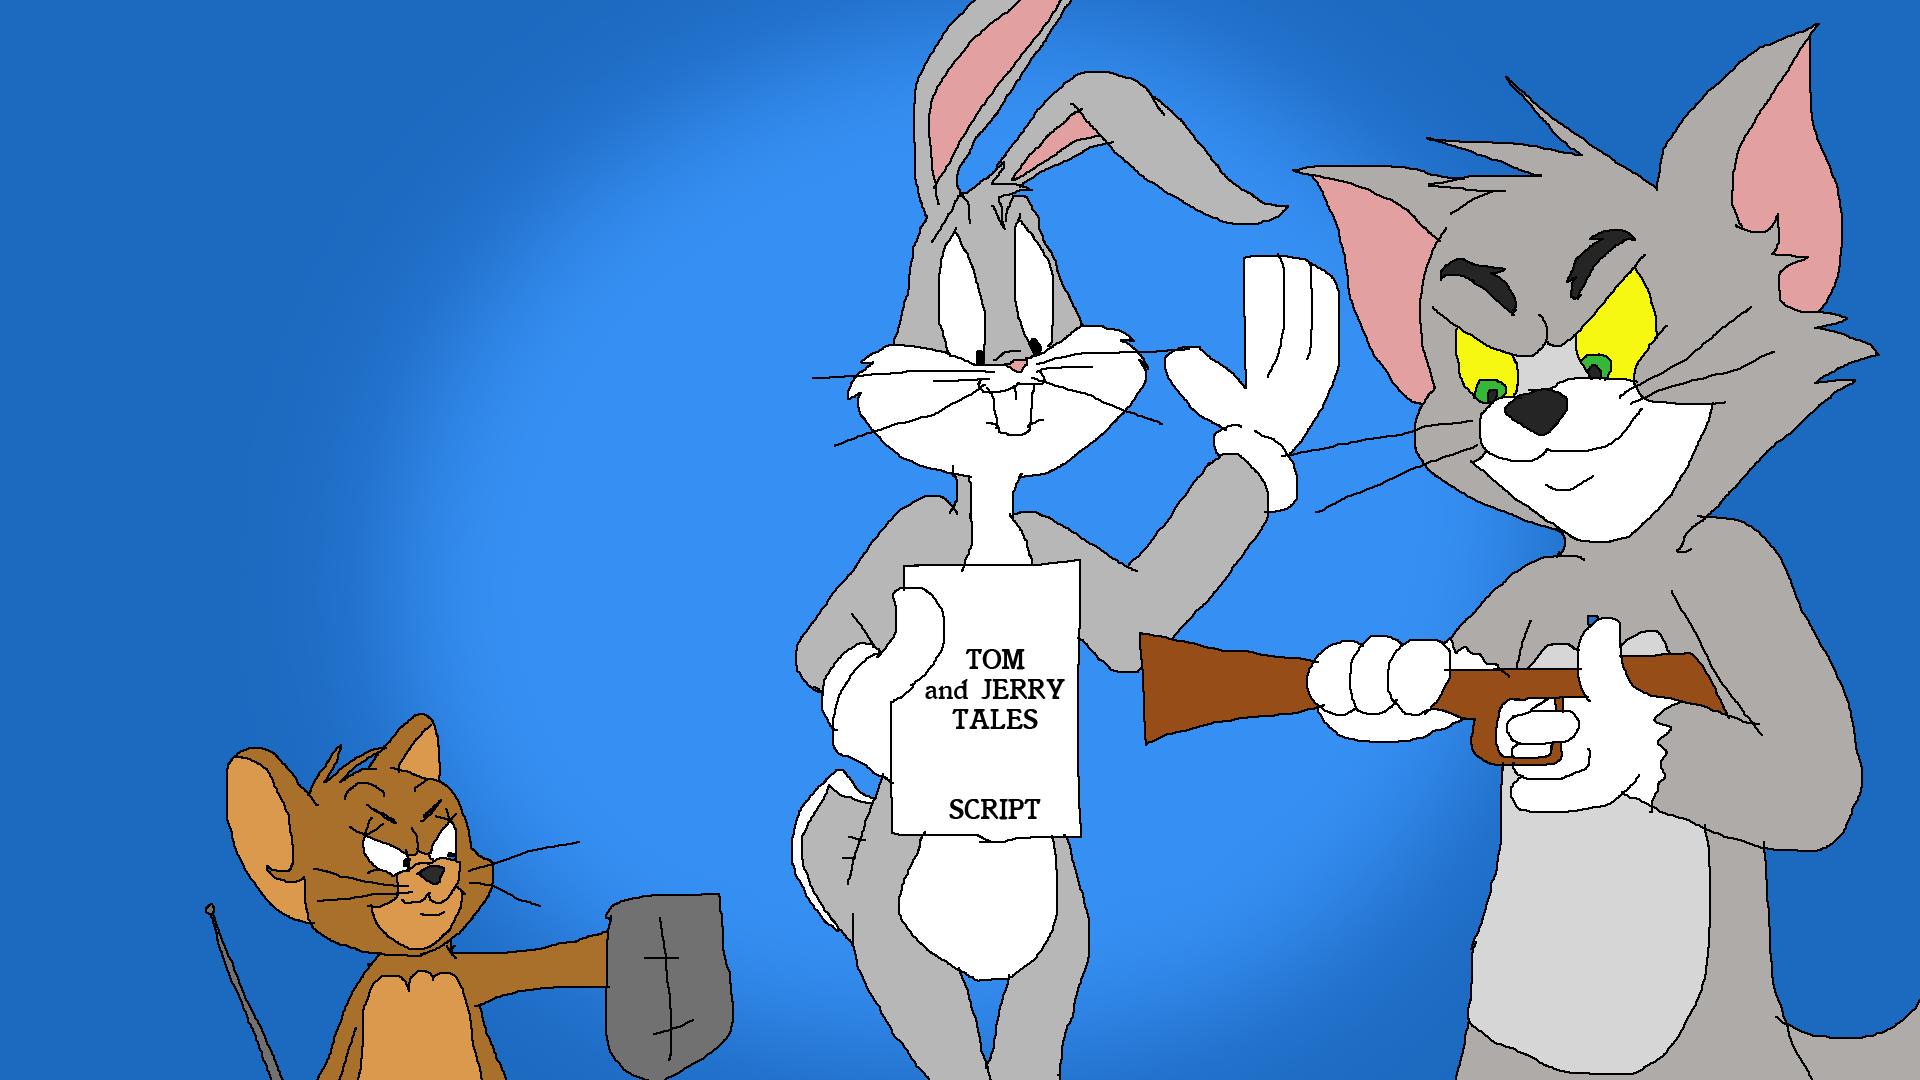 Tom and Jerry Tales proposal by TomArmstrong20 on DeviantArt